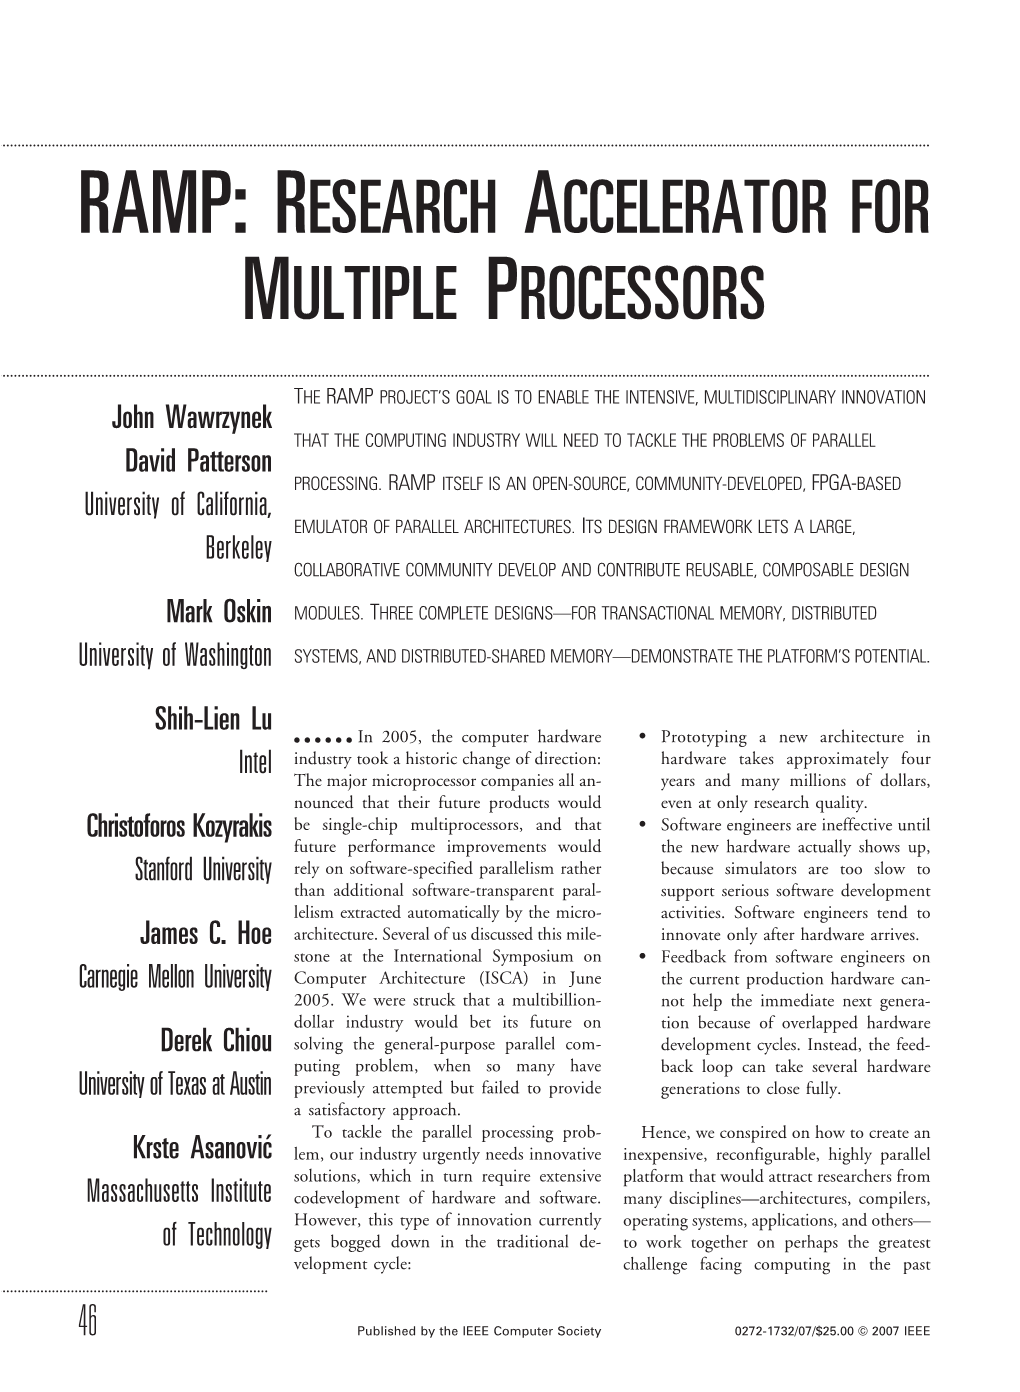 Ramp: Research Accelerator for Multiple Processors